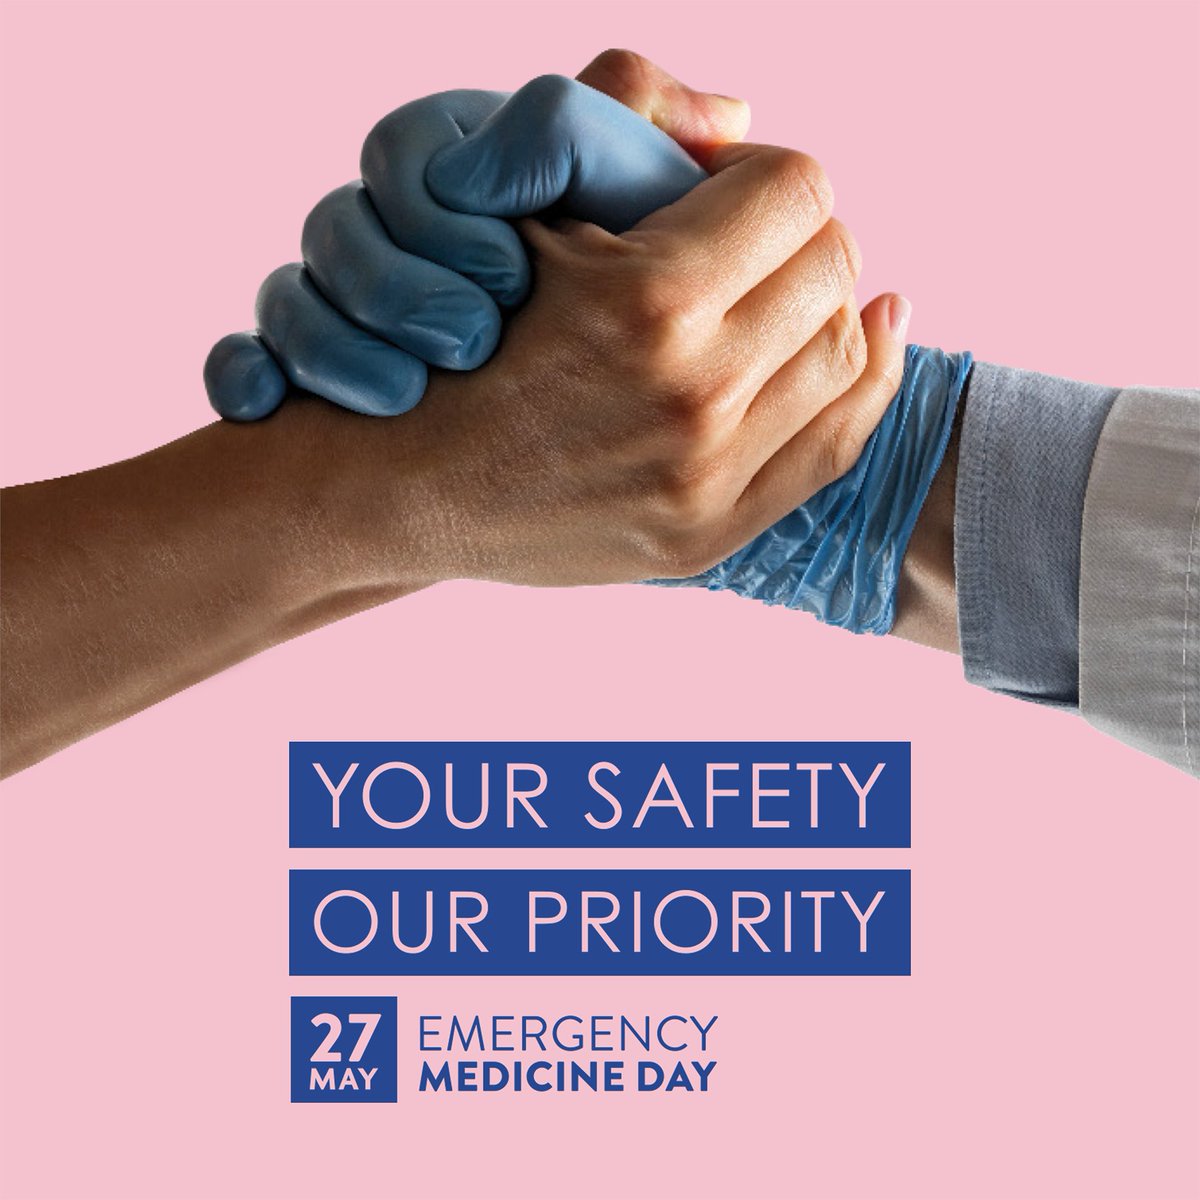 Today is #EmergencyMedicineDay! Thank you to all our emergency care colleagues for your hard work and dedication. This year the focus is on safety – for both patients and staff, around the world ➡️ emergencymedicine-day.org #EMDay23 #PatientSafety @EmergencyDay